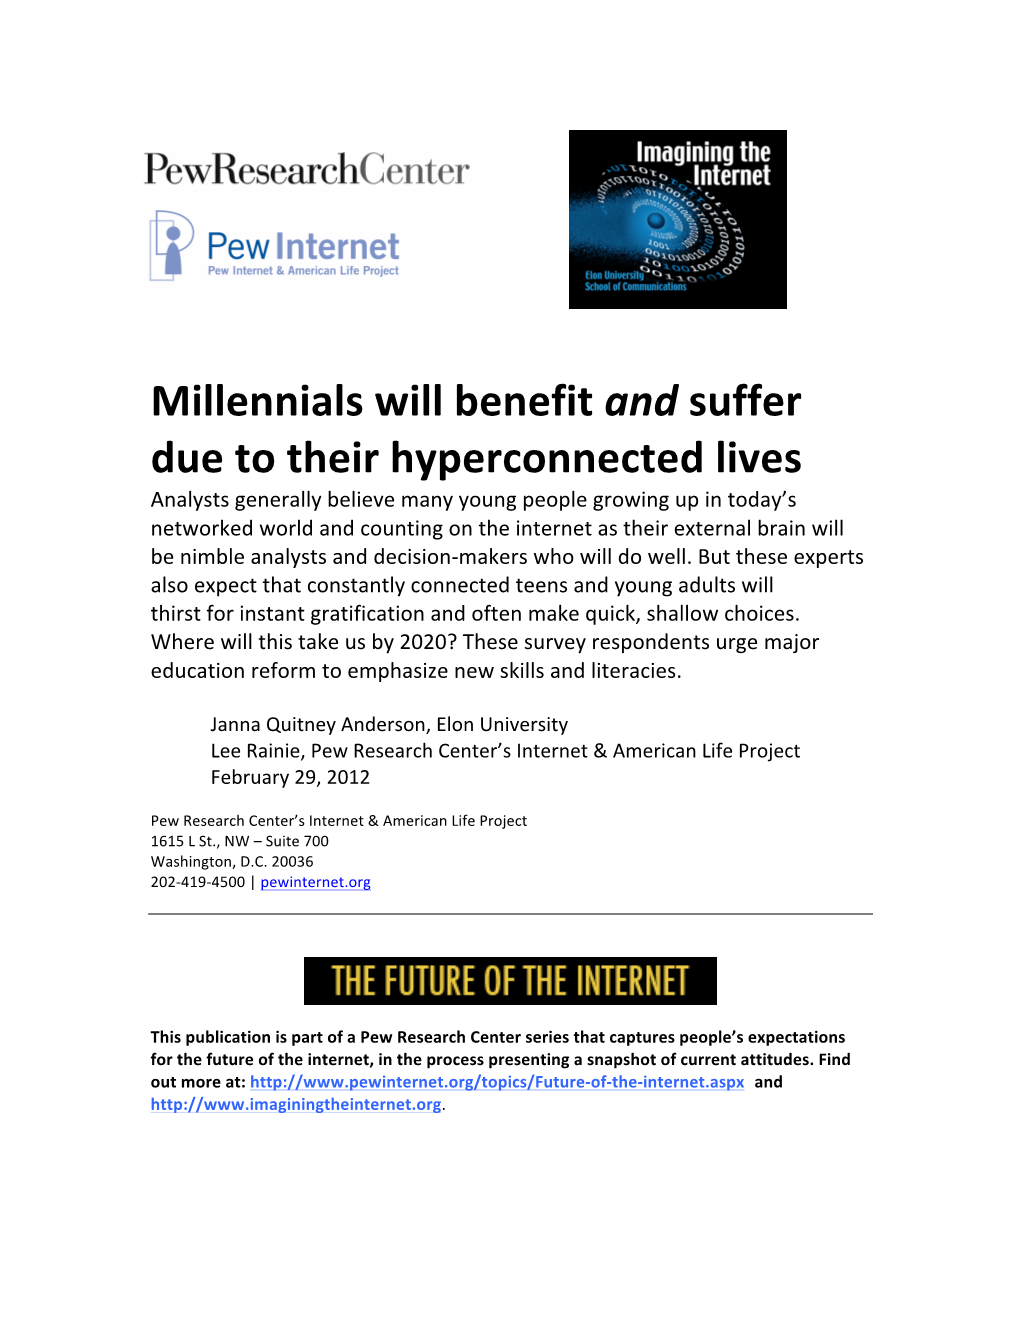 Millennials Will Benefit and Suffer Due to Their Hyperconnected Lives